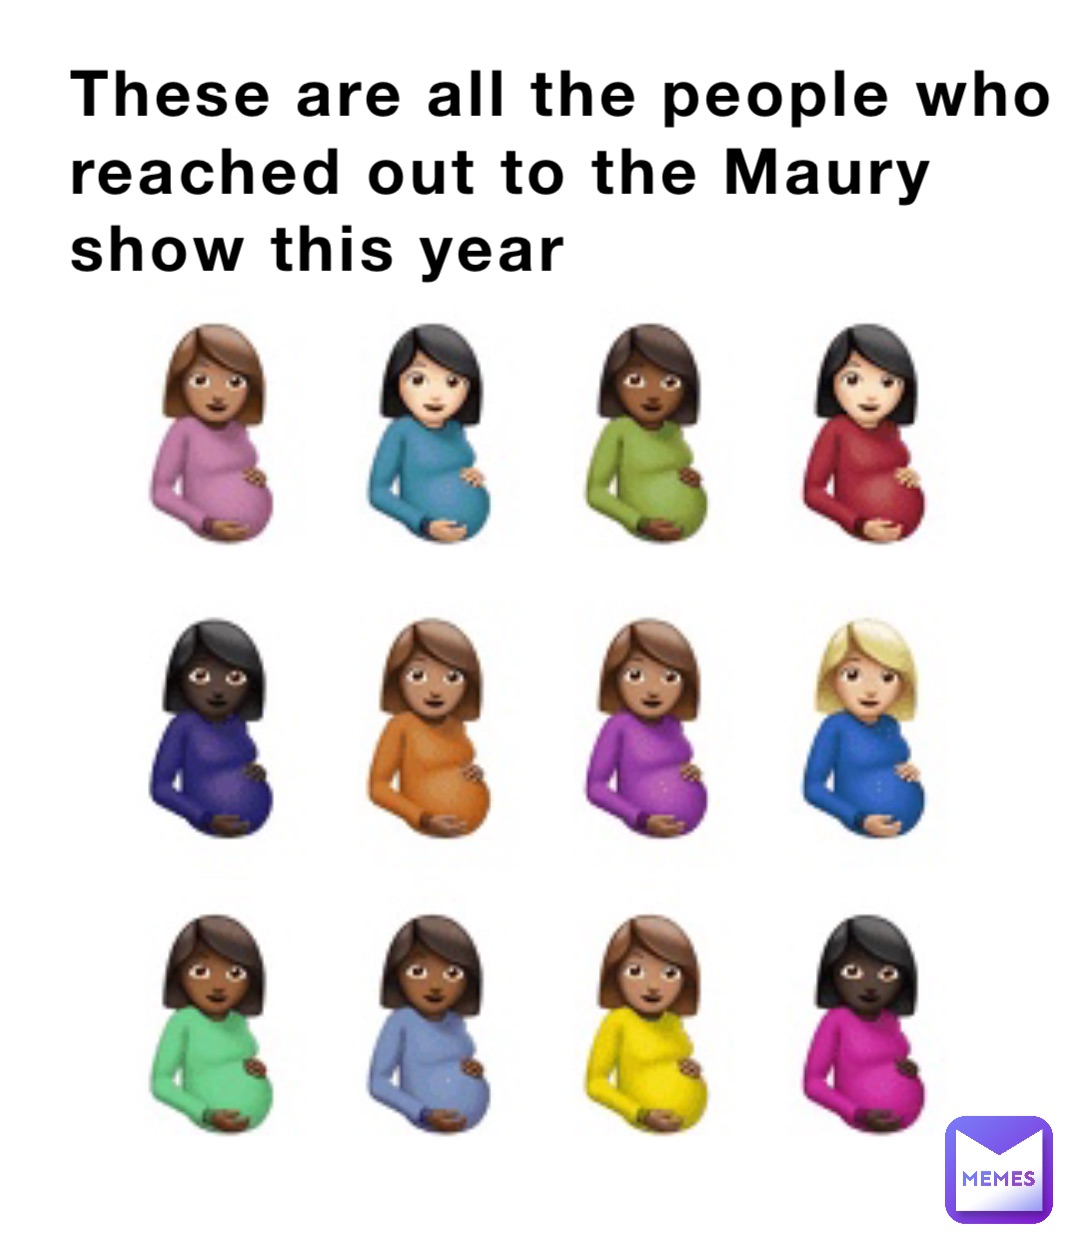 These are all the people who reached out to the Maury show this year